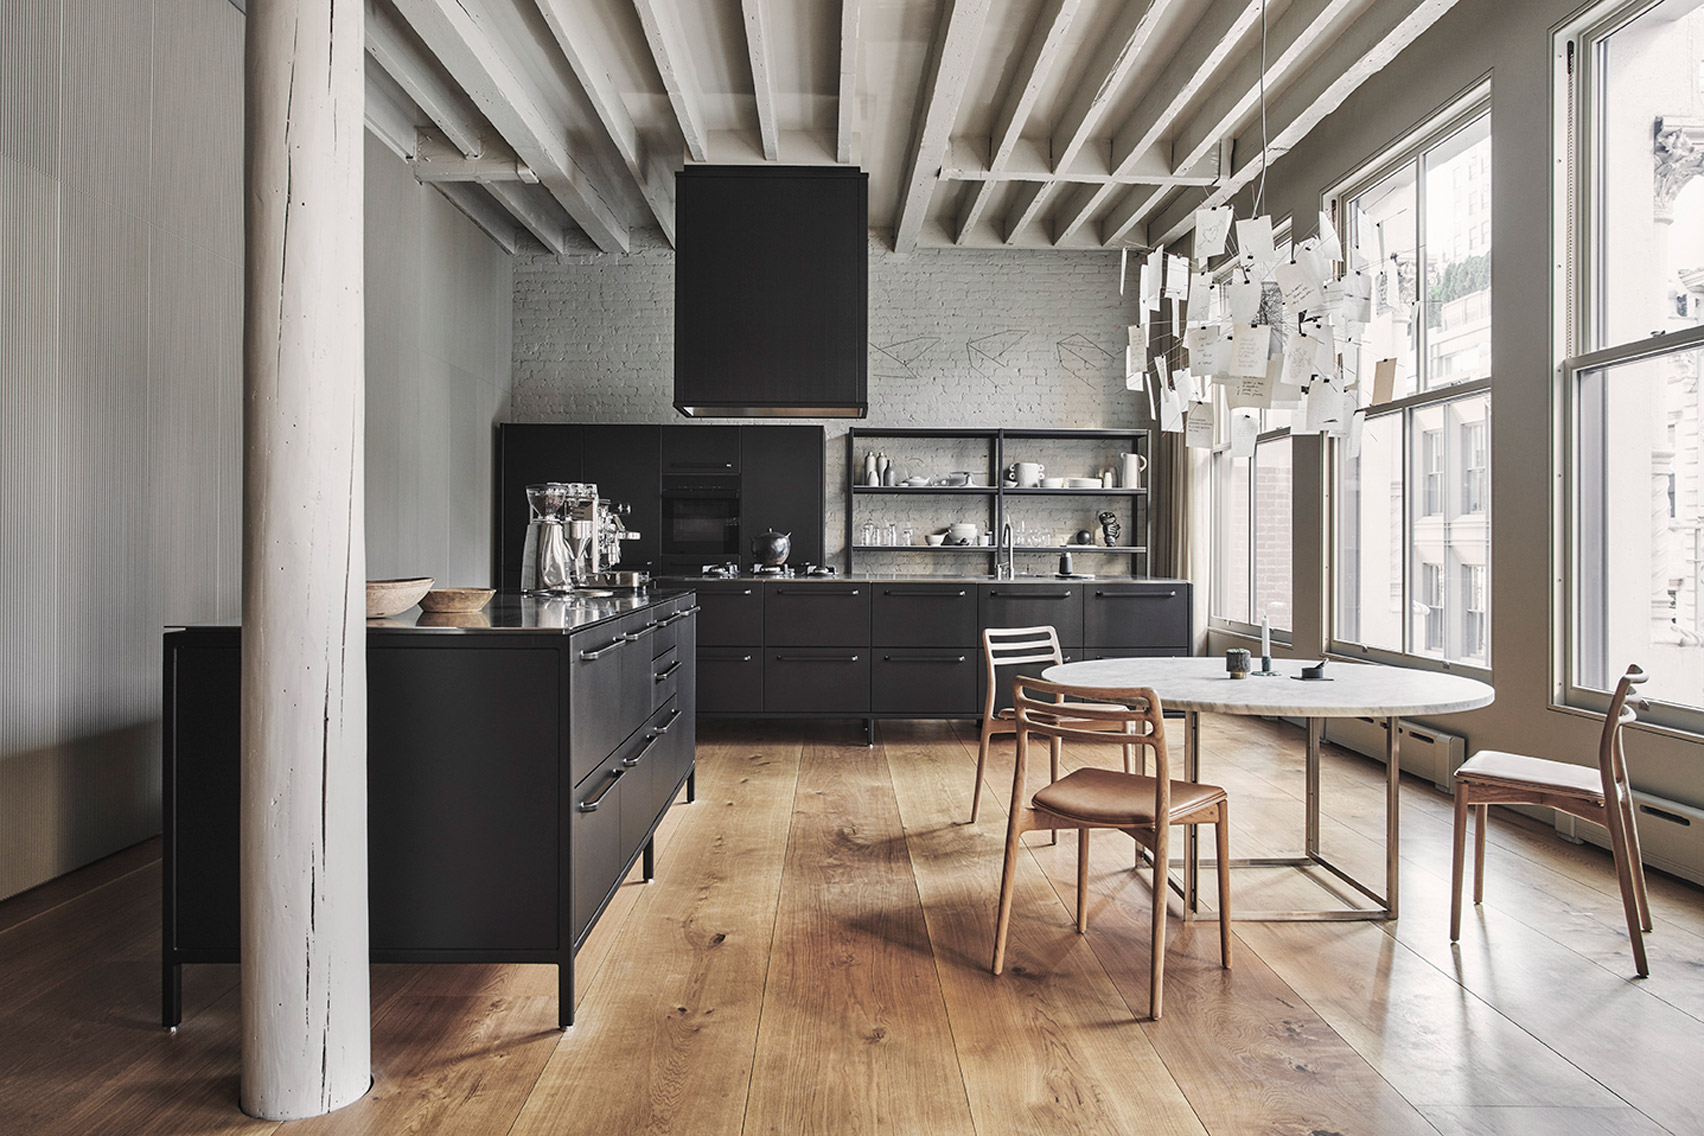 A grey toned kitchen and dining area in an apartment